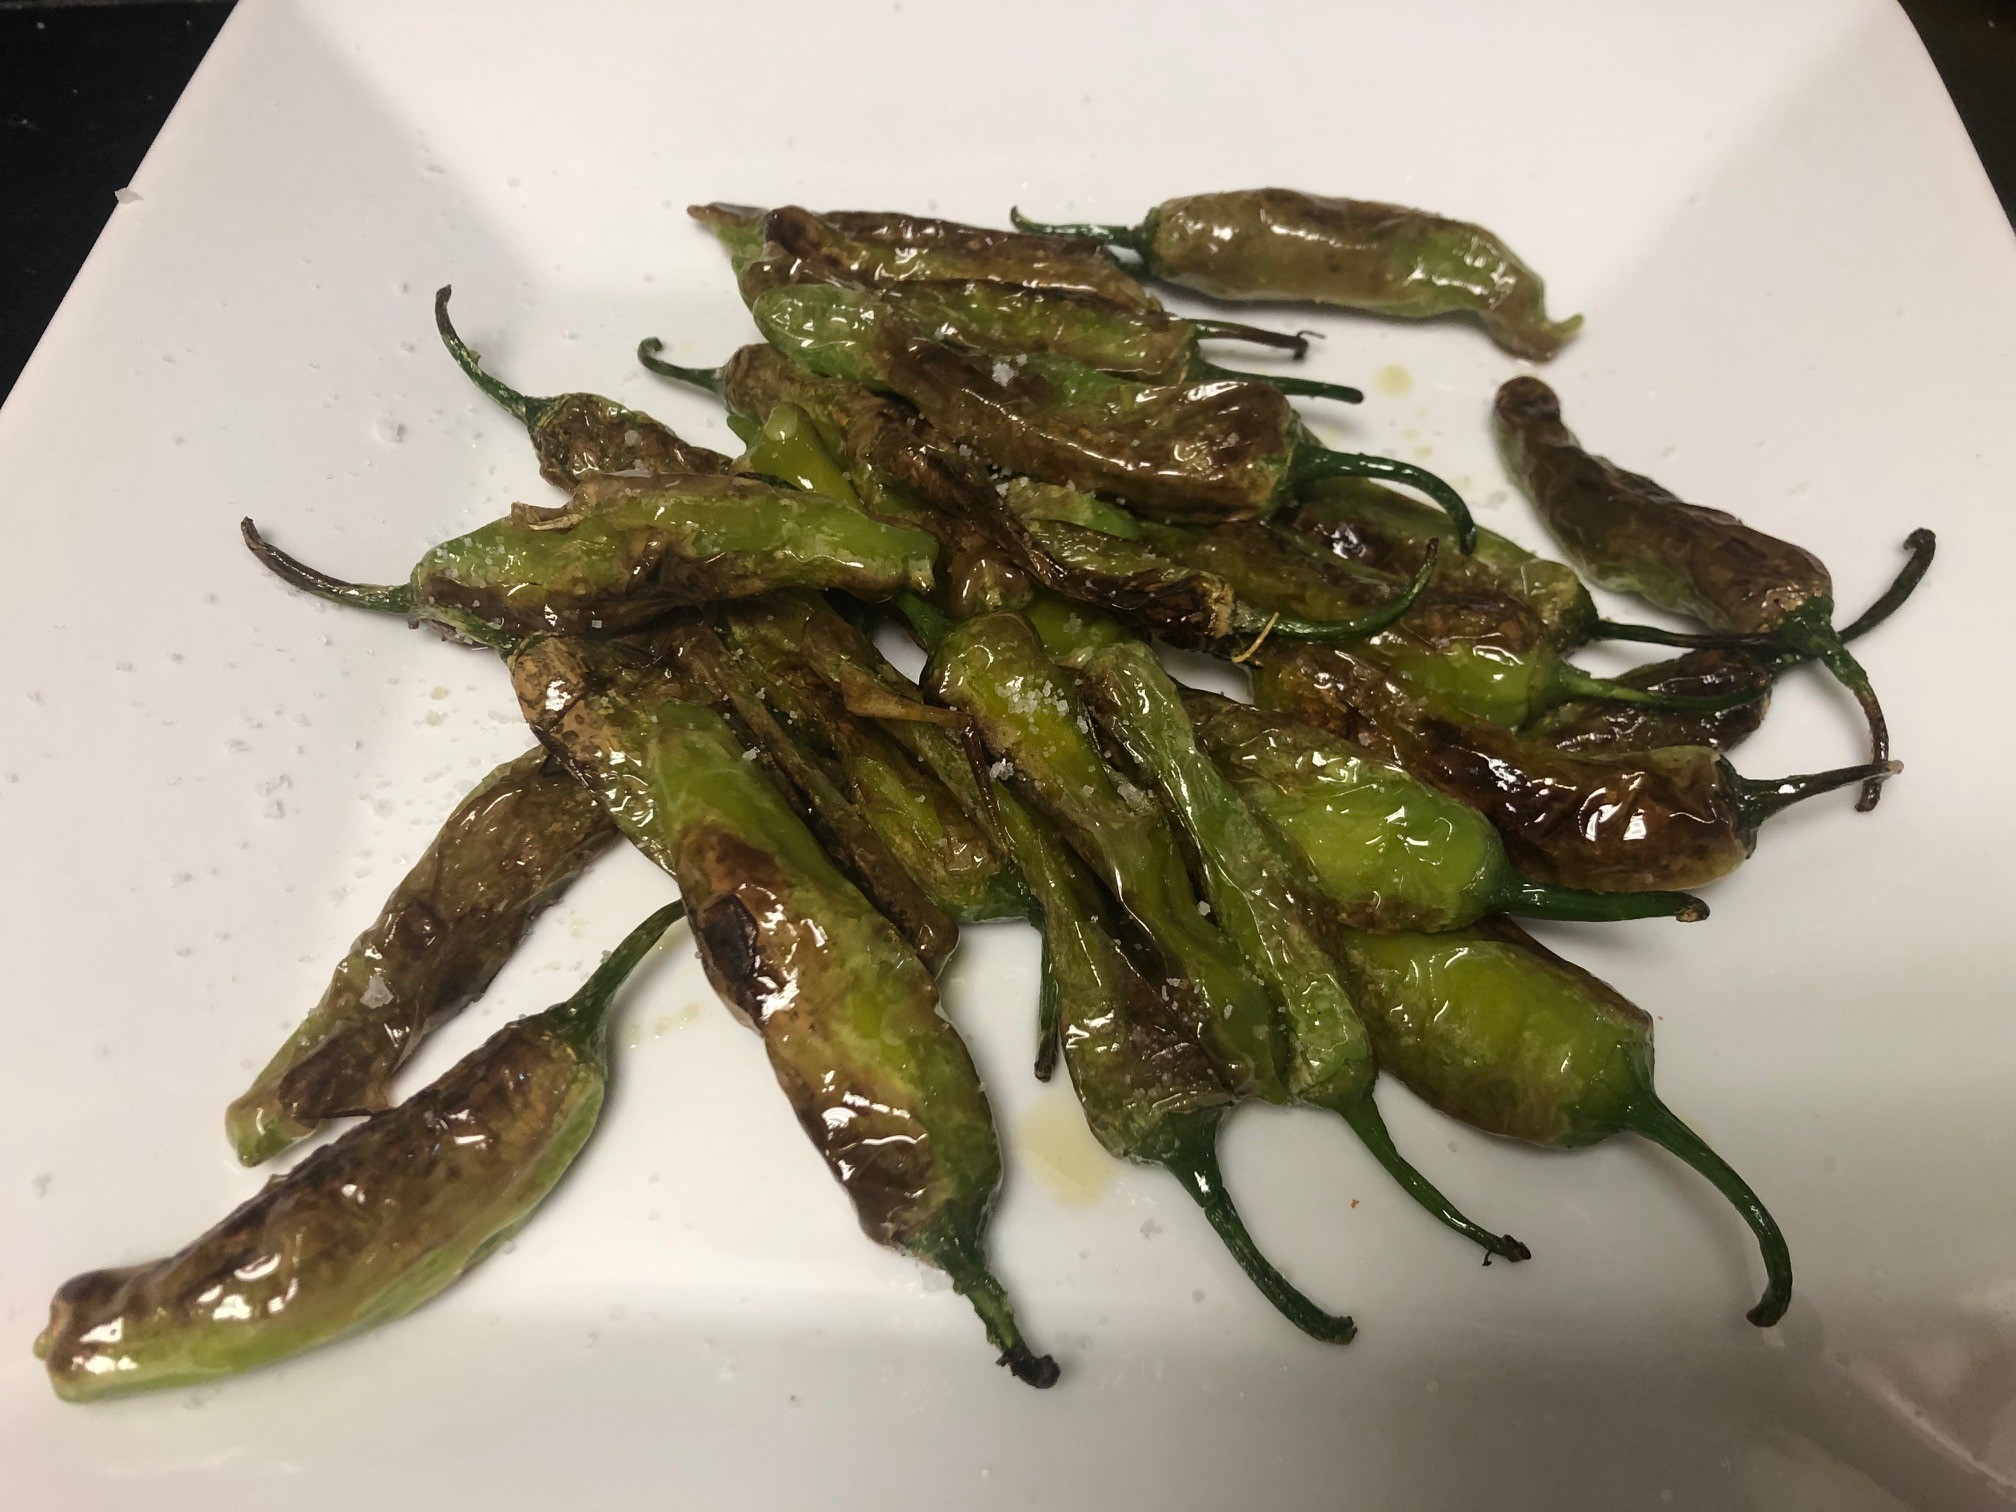 Blistered Shishito Peppers